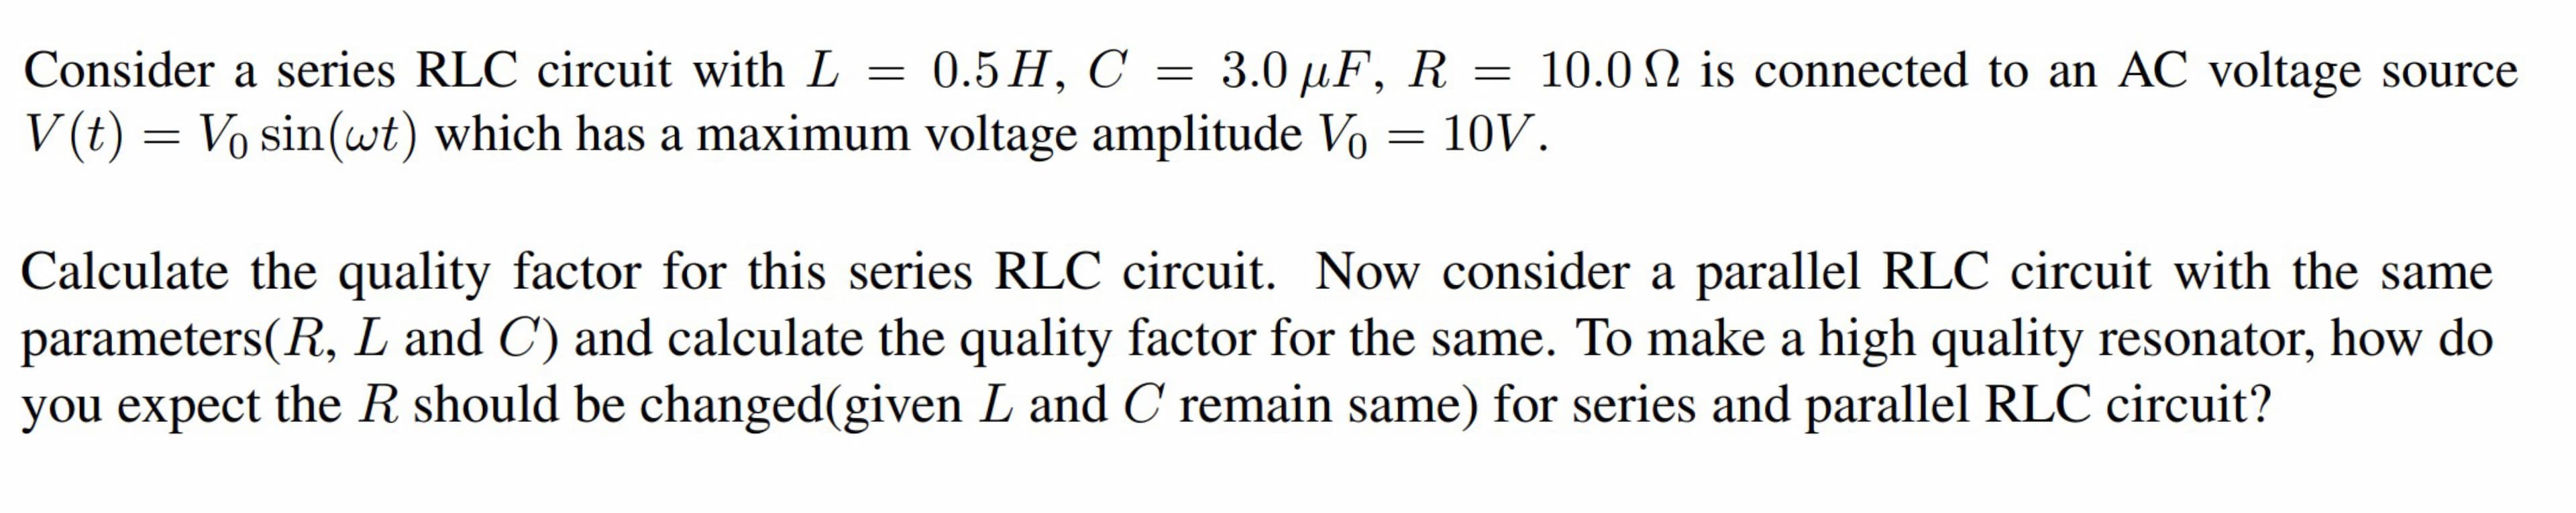 Consider a series RLC circuit with L
-
0.5 H, C = 3.0 µF, R = 10.0 is connected to an AC voltage source
V(t) = Vo sin(wt) which has a maximum voltage amplitude Vo = 10V.
=
Calculate the quality factor for this series RLC circuit. Now consider a parallel RLC circuit with the same
parameters(R, L and C) and calculate the quality factor for the same. To make a high quality resonator, how do
you expect the R should be changed(given L and C remain same) for series and parallel RLC circuit?